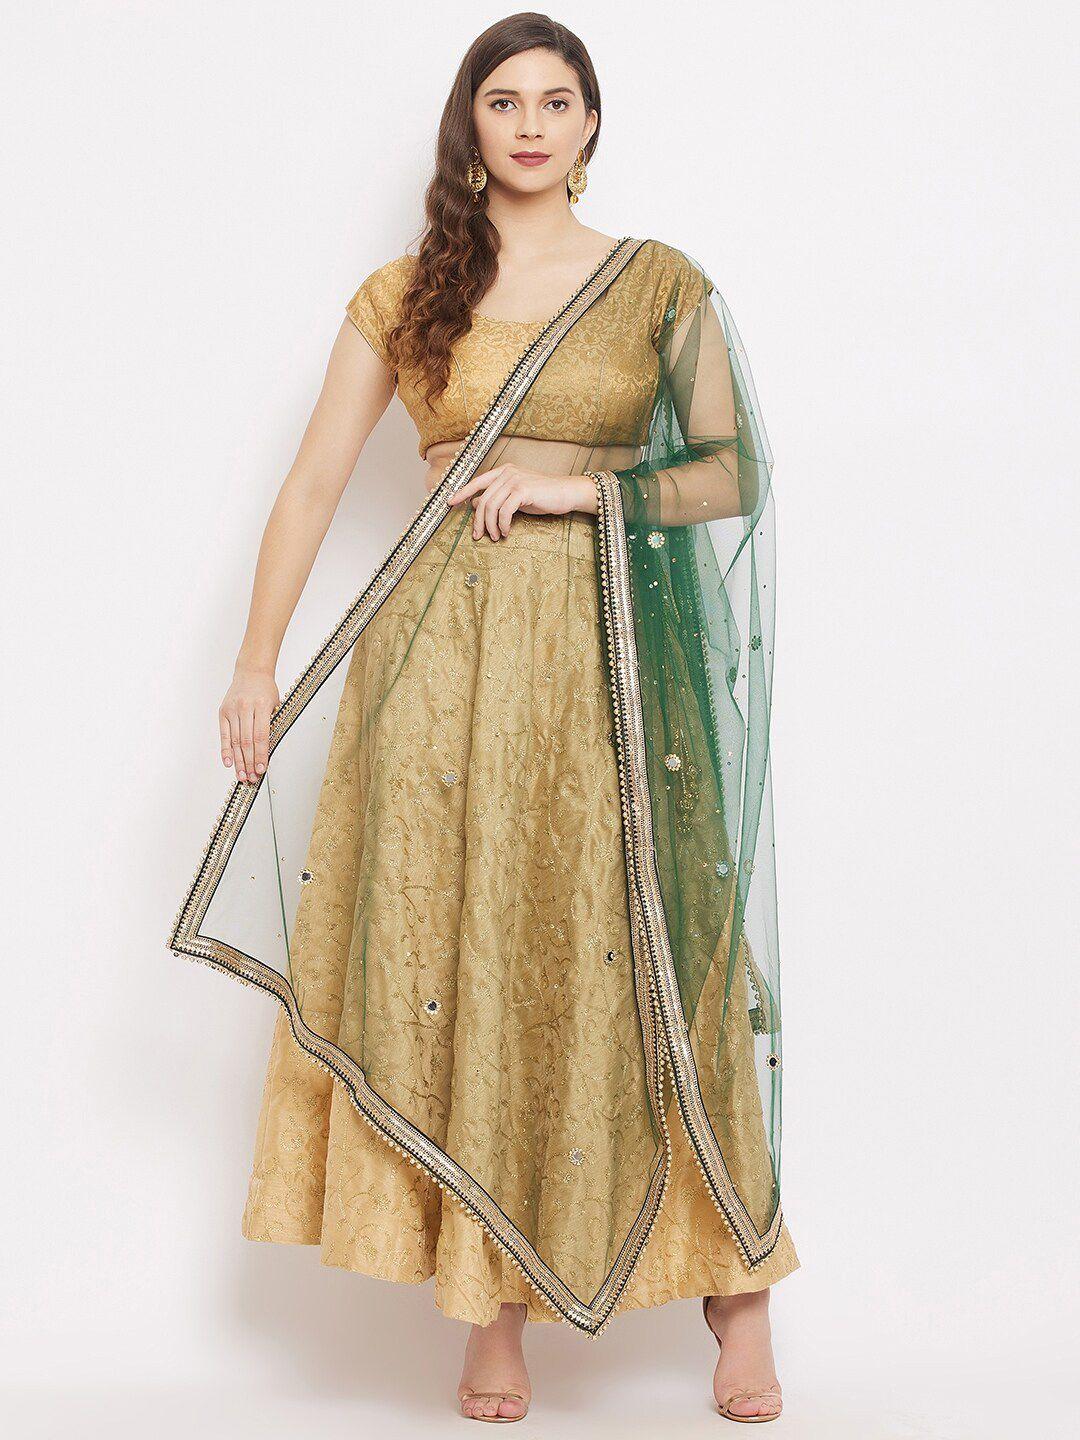 Clora Creation Green & Silver-Toned Ethnic Motifs Embroidered Dupatta with Beads and Stones